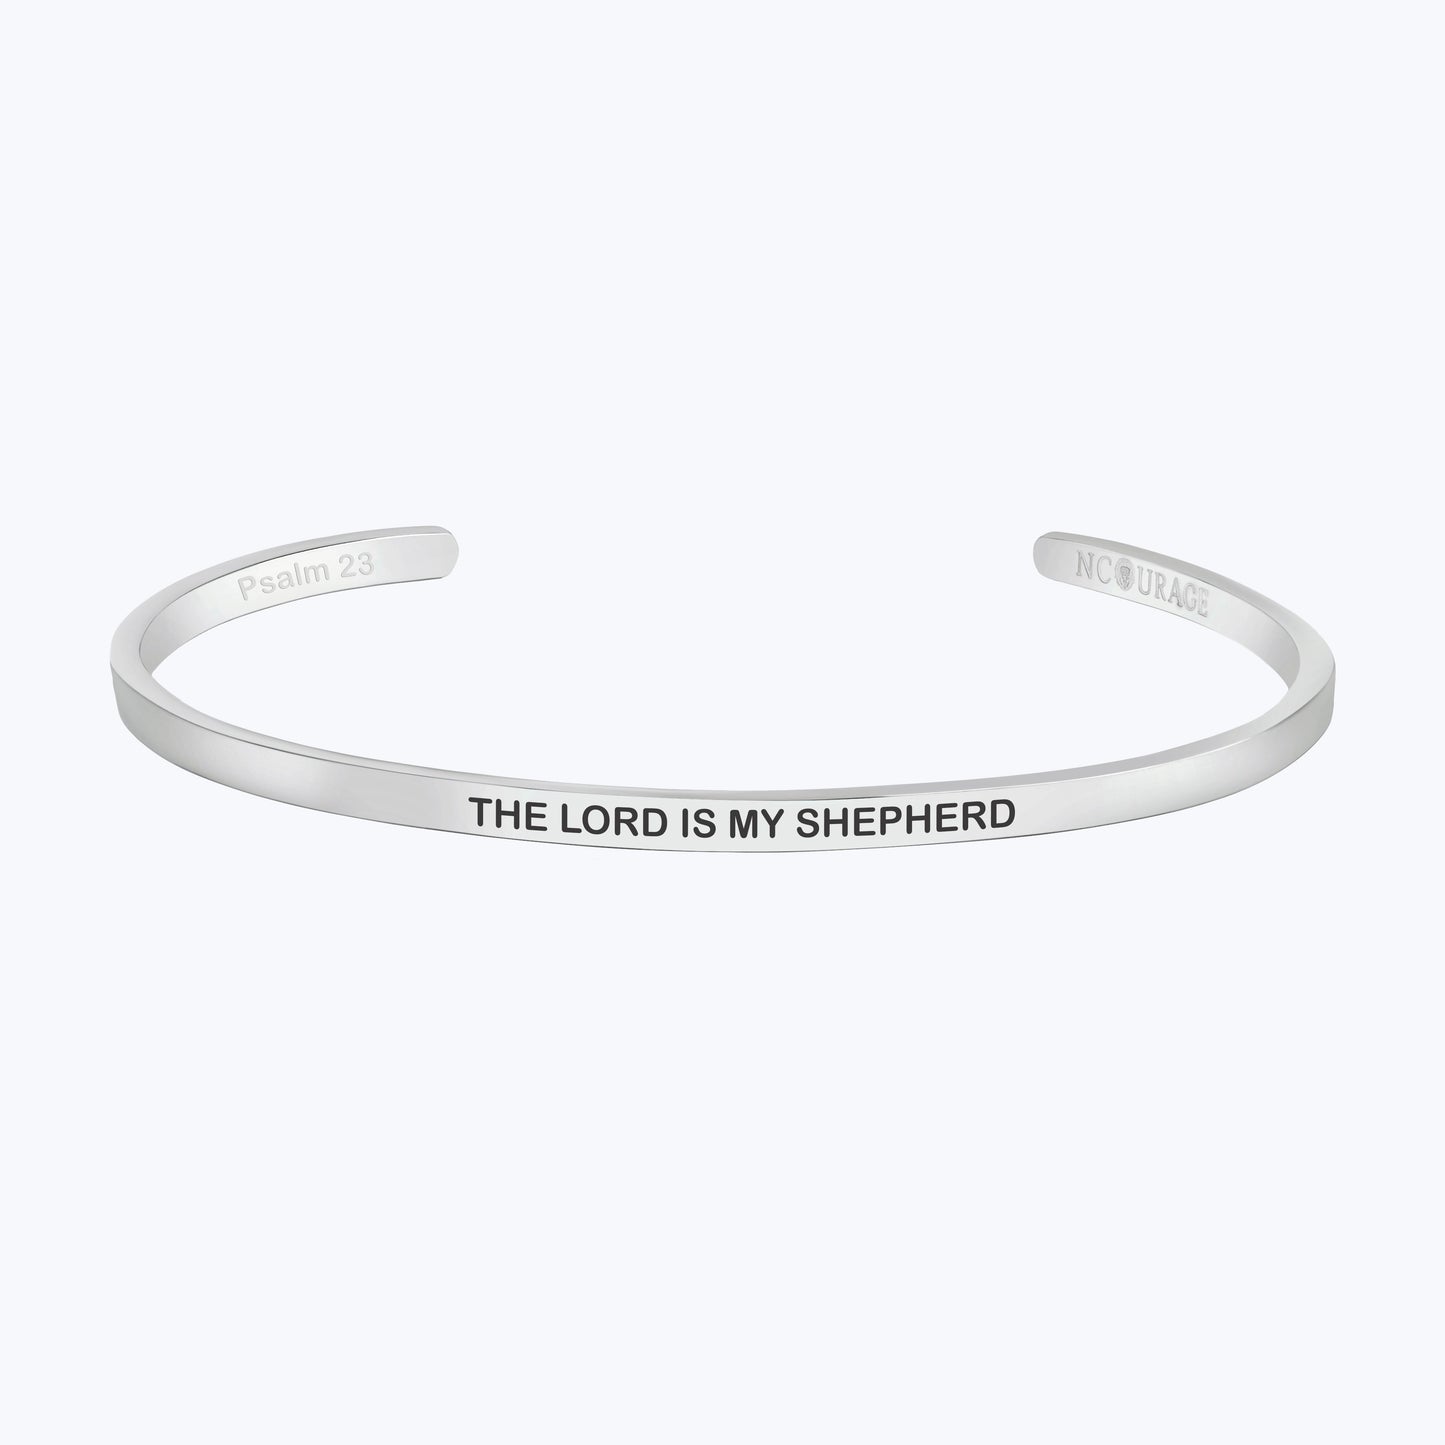 THE LORD IS MY SHEPHERD - NCOURAGE Bands and Bracelets